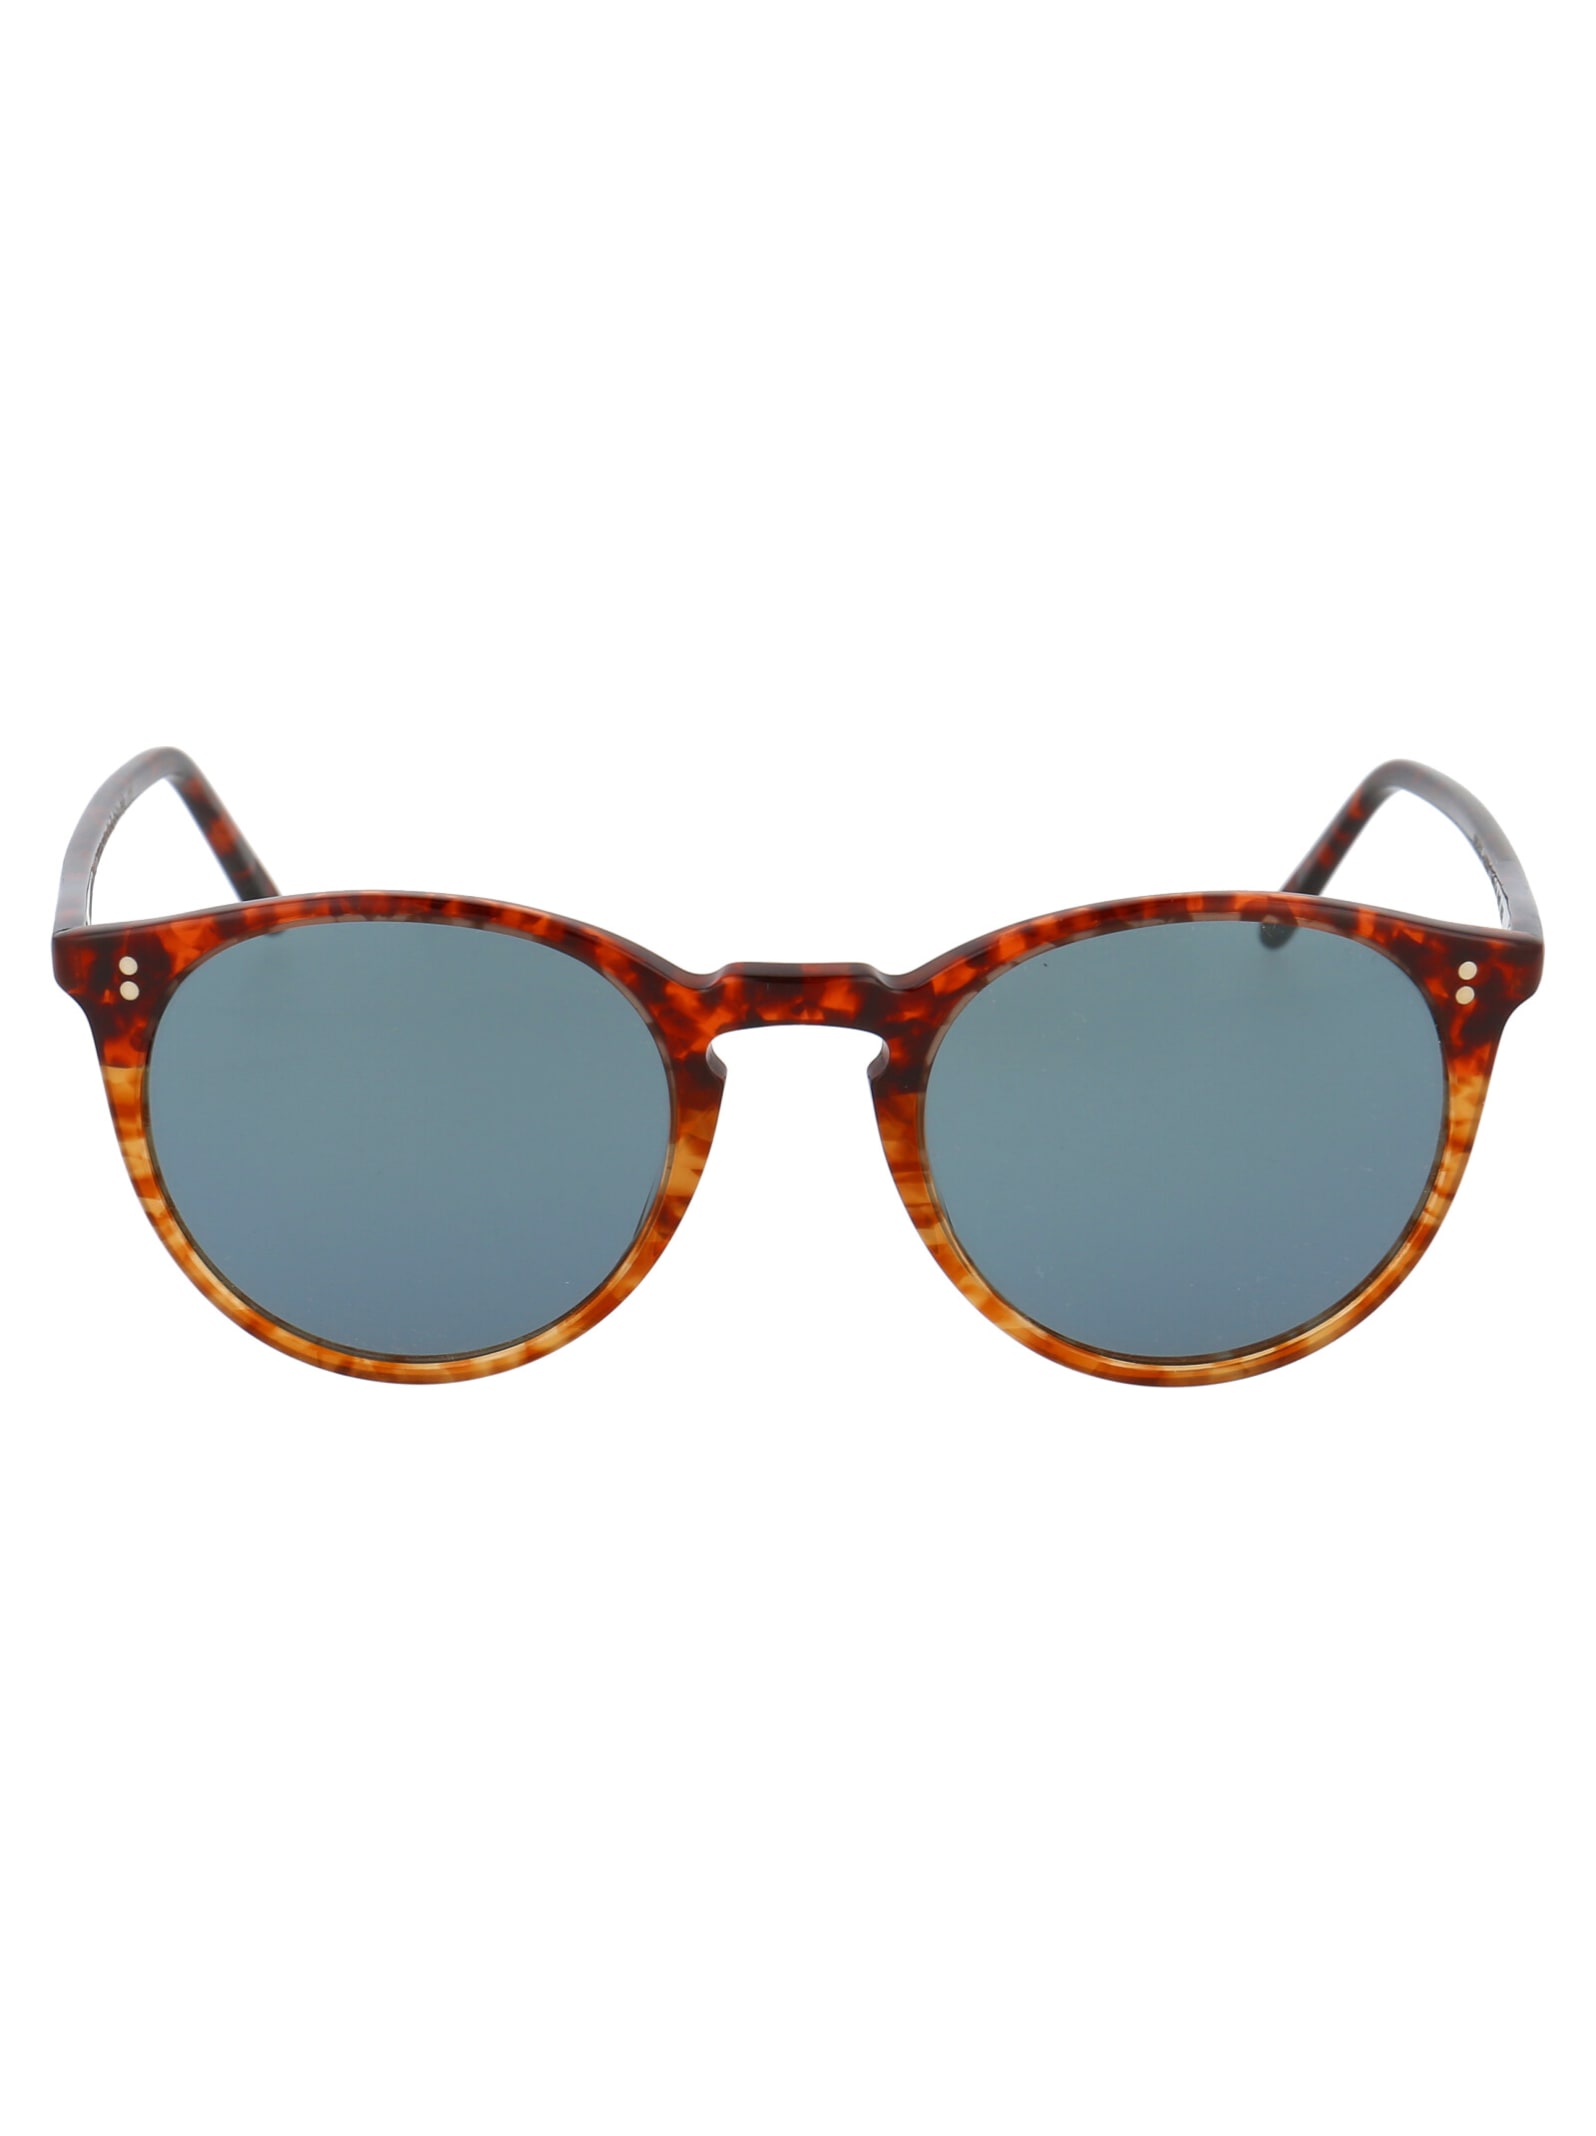 Oliver Peoples Omalley Sun Sunglasses